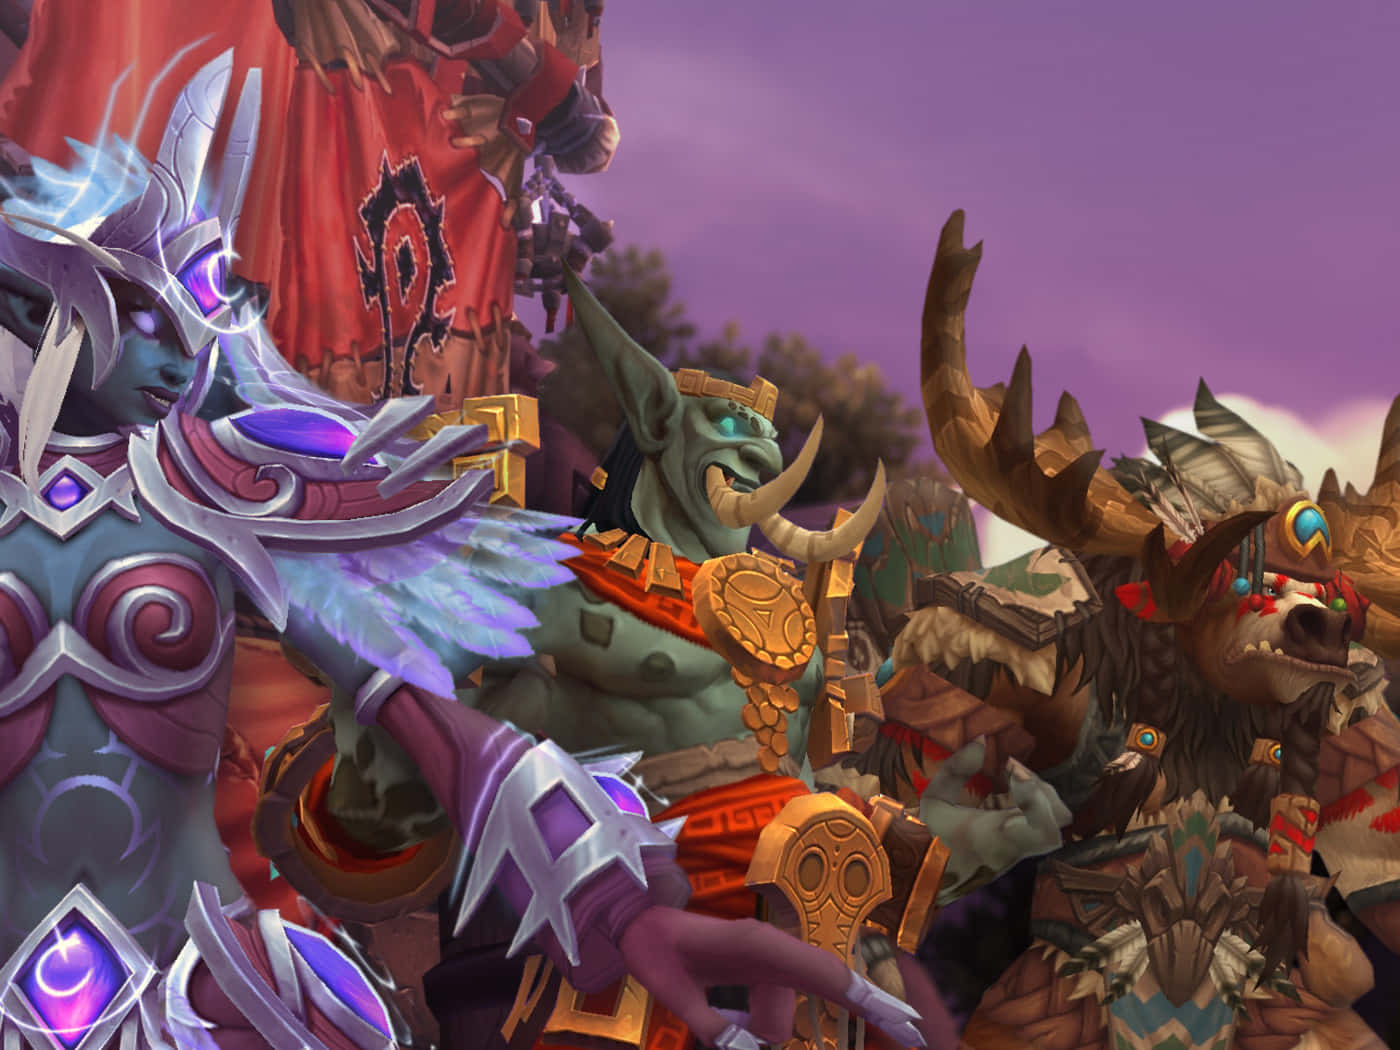 Epic Battle of World of Warcraft Races Wallpaper